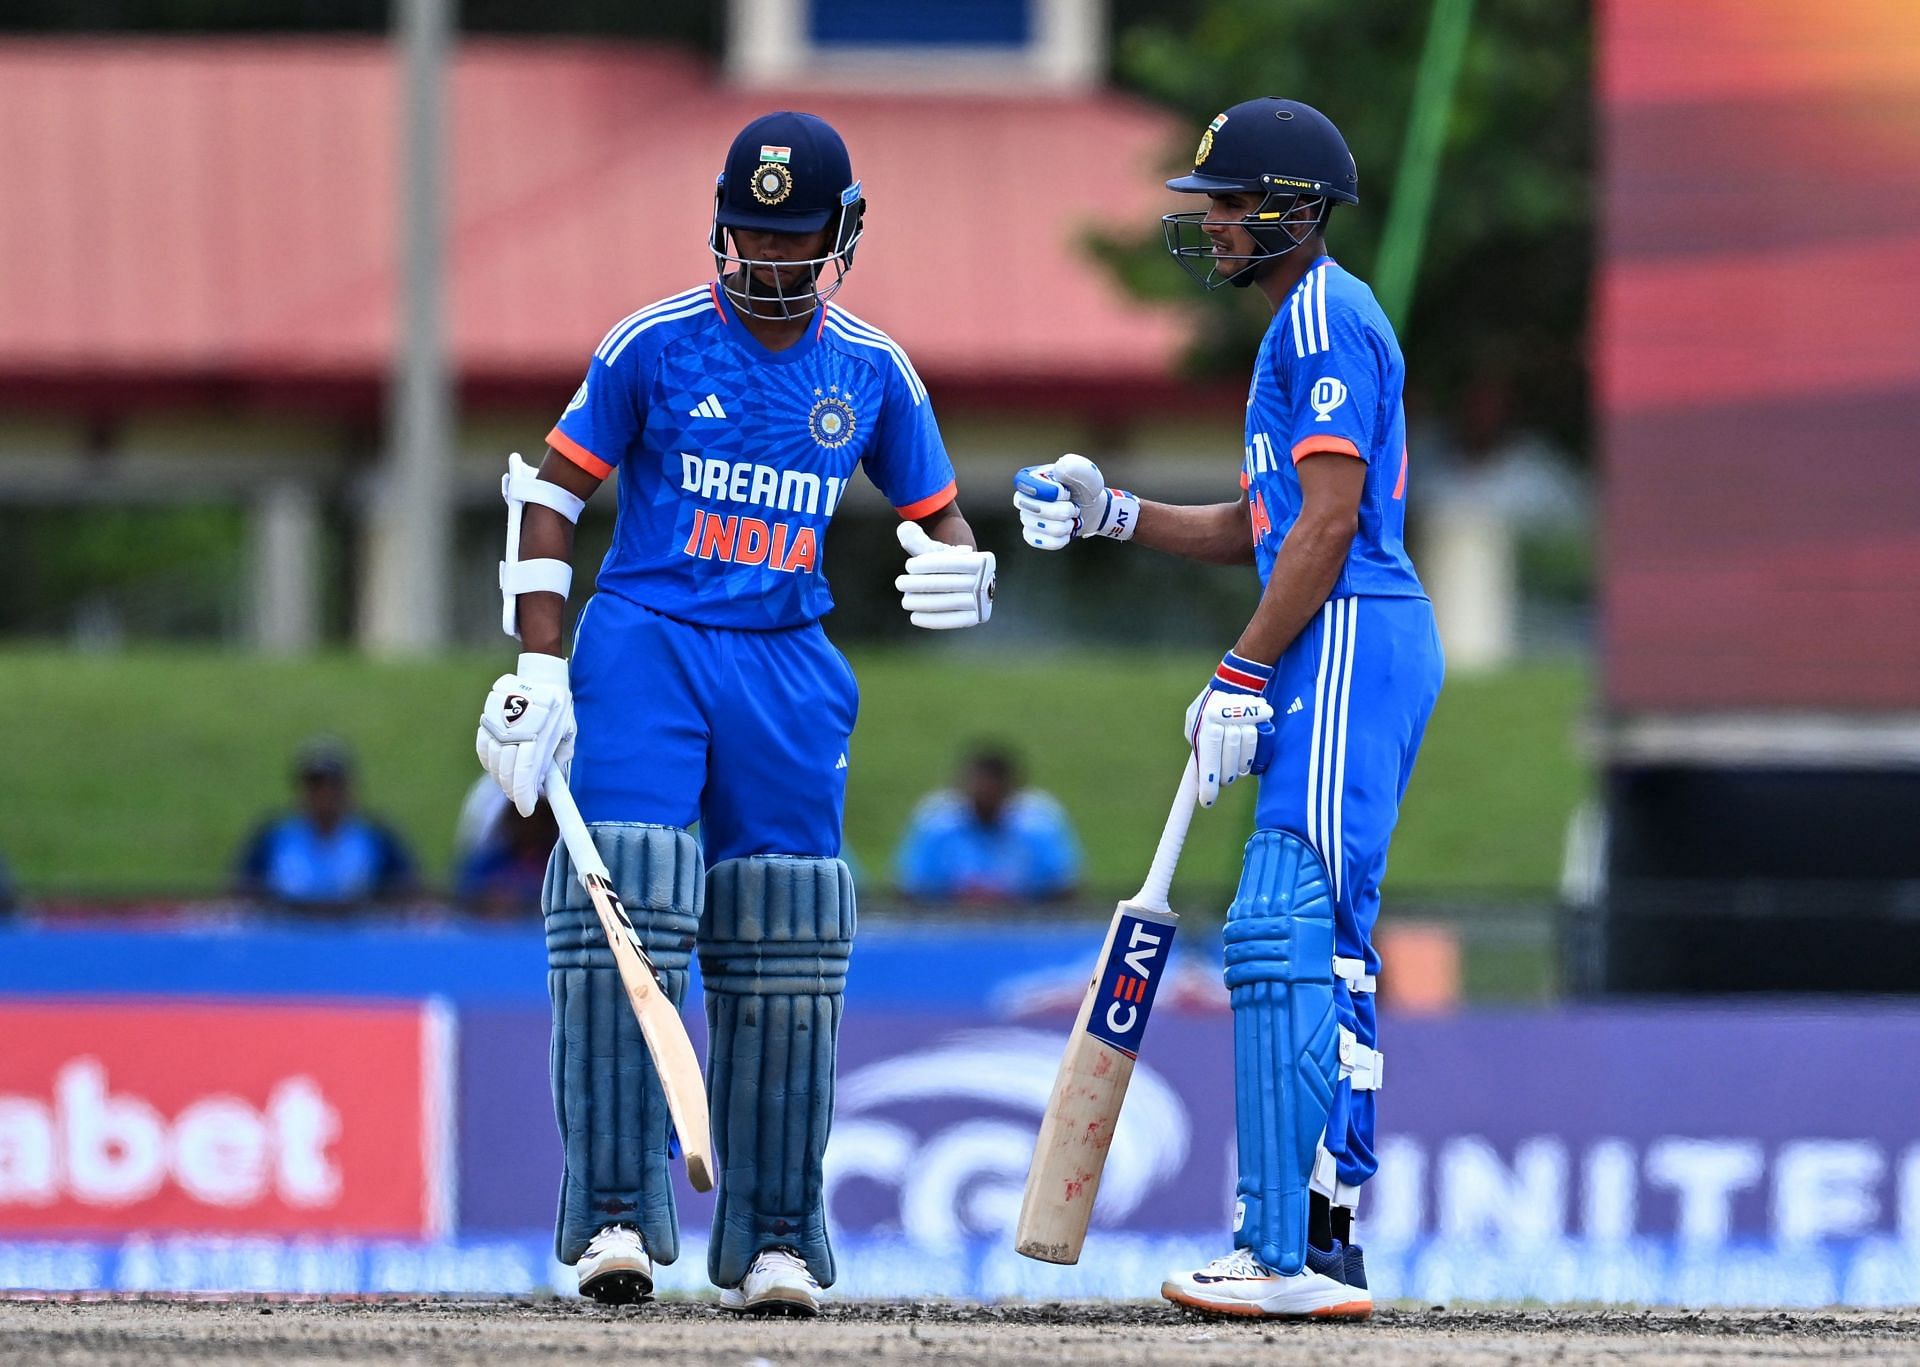 Yashasvi Jaiswal and Shubman Gill equal India's highest opening partnership in T20Is